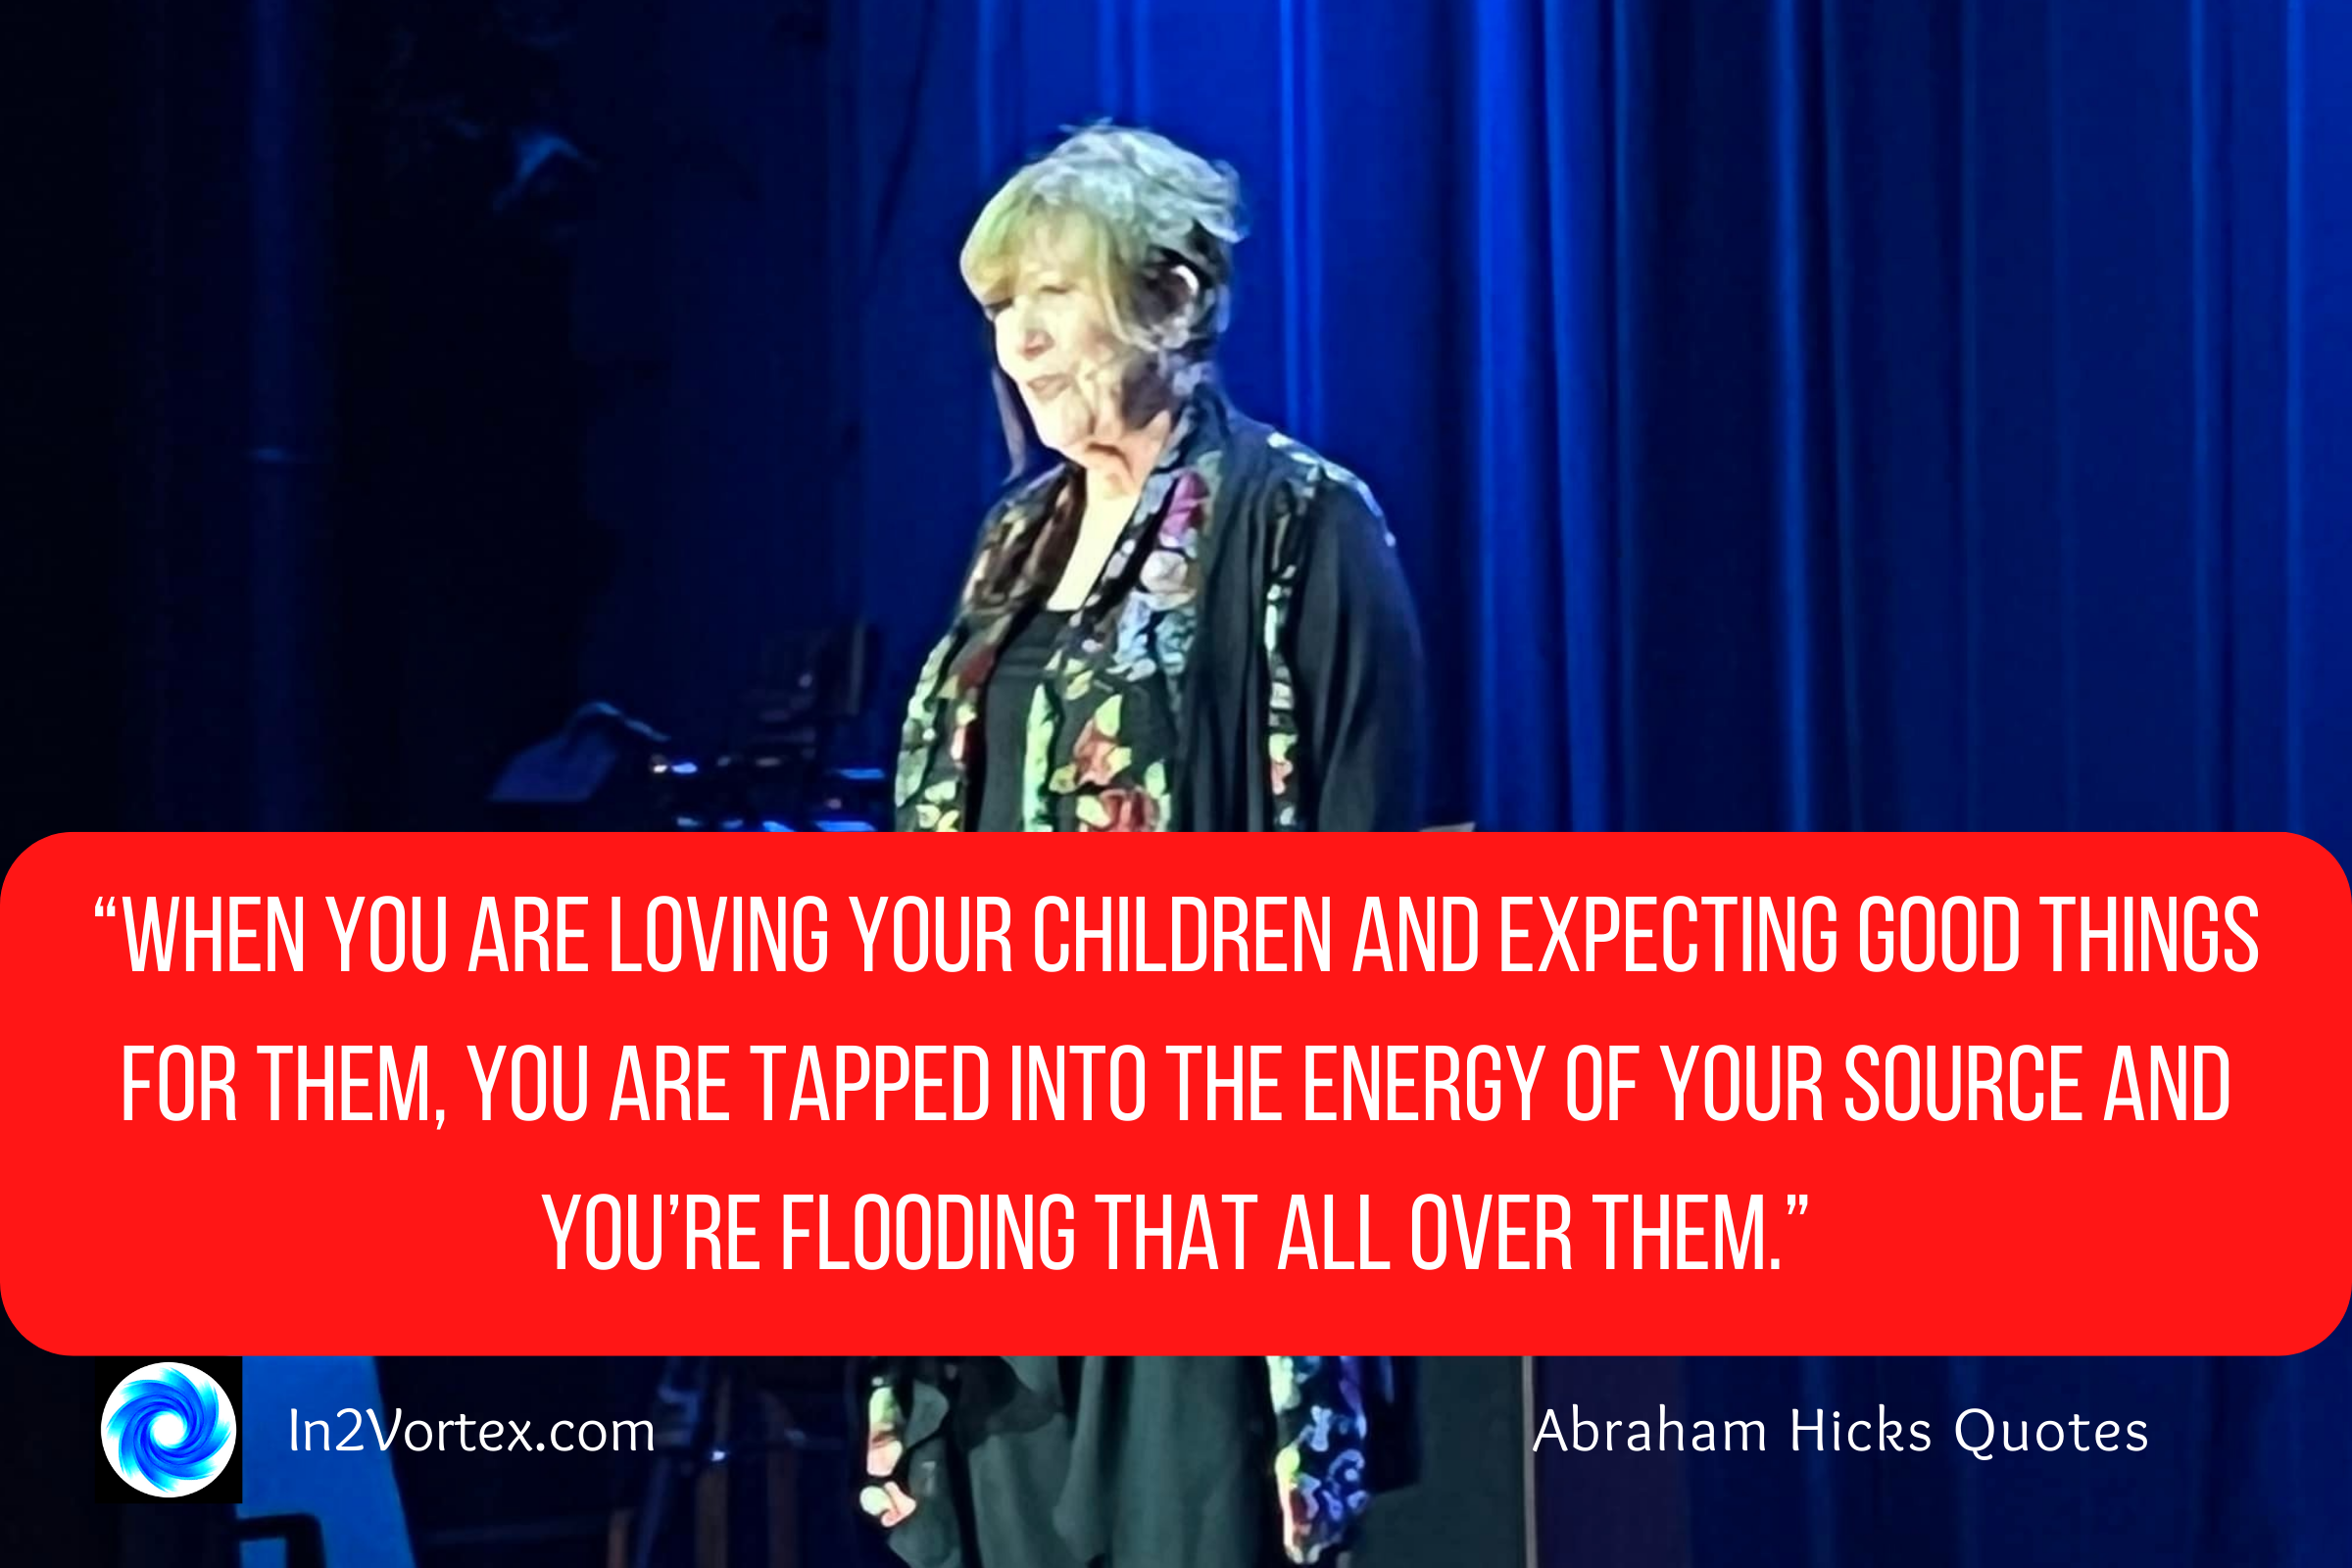 “When you are loving your children and expecting good things for them, you are tapped into the energy of your source and you’re flooding that all over them.” — Abraham Hicks, in2vortex, esther hicks, law of attraction